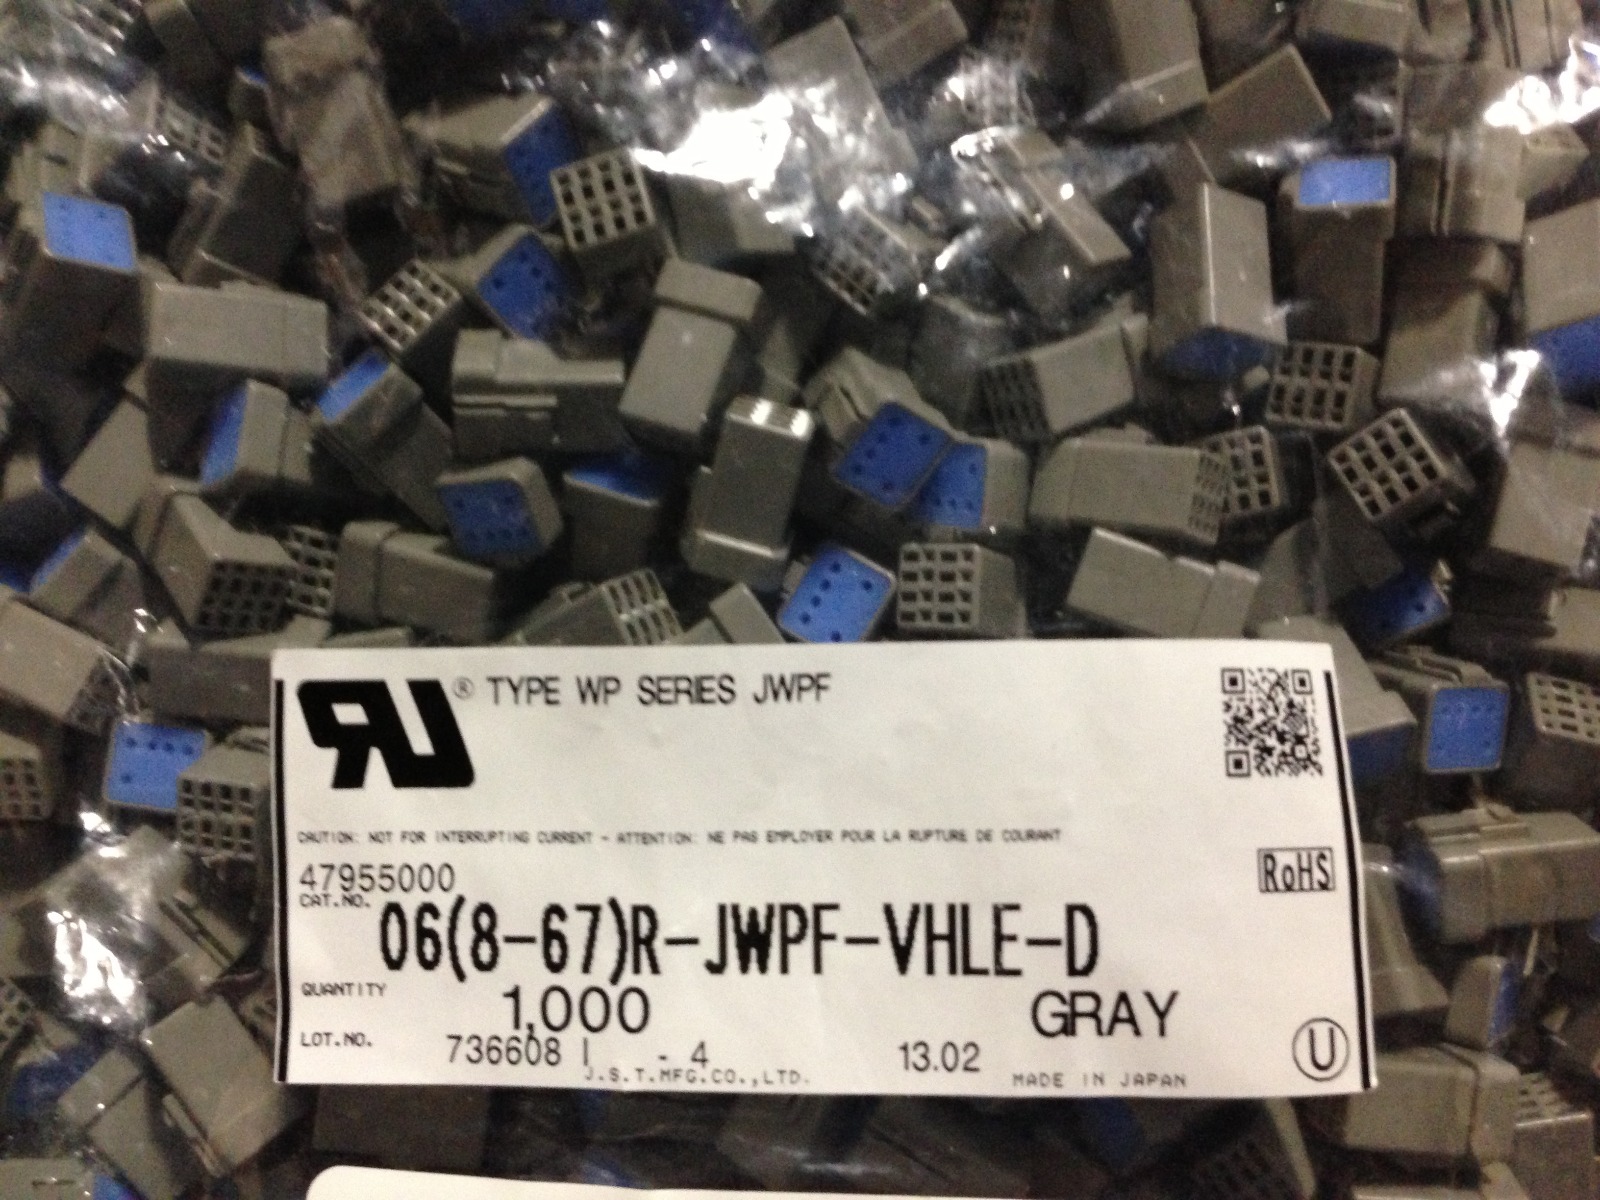 06(8-67)R-JWPF-VHLED